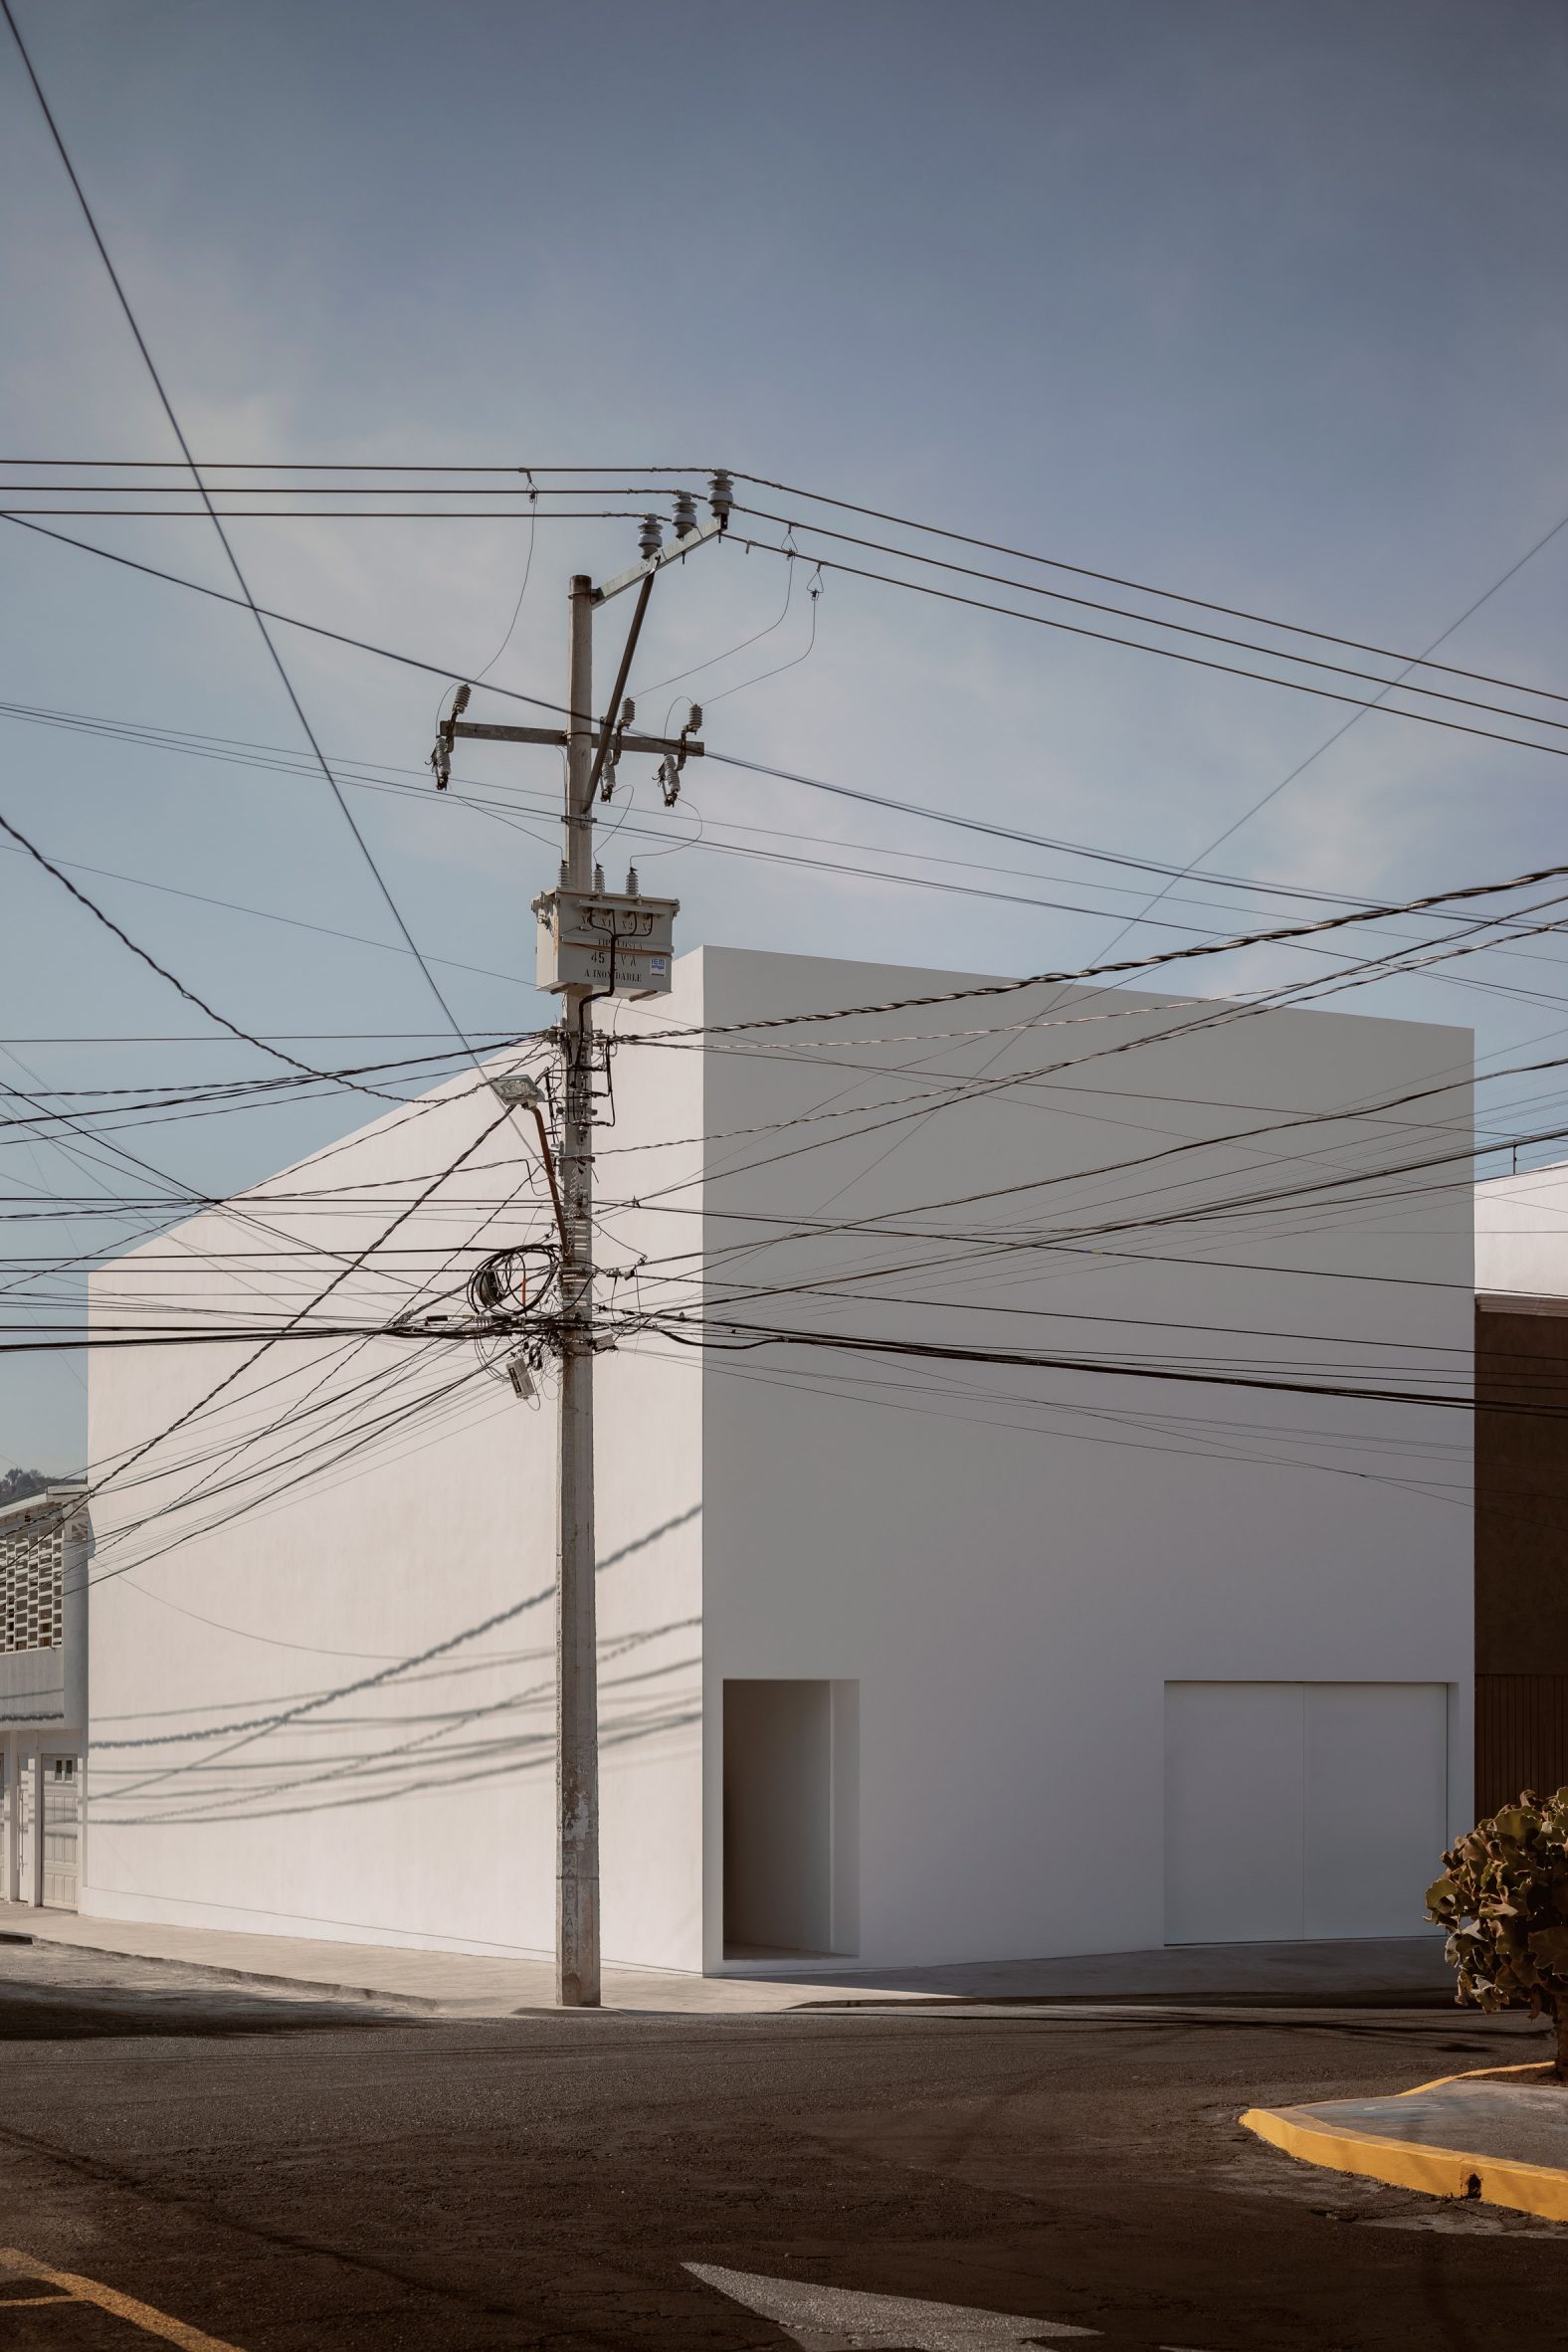 A white cube house on a street corner with telephone poles